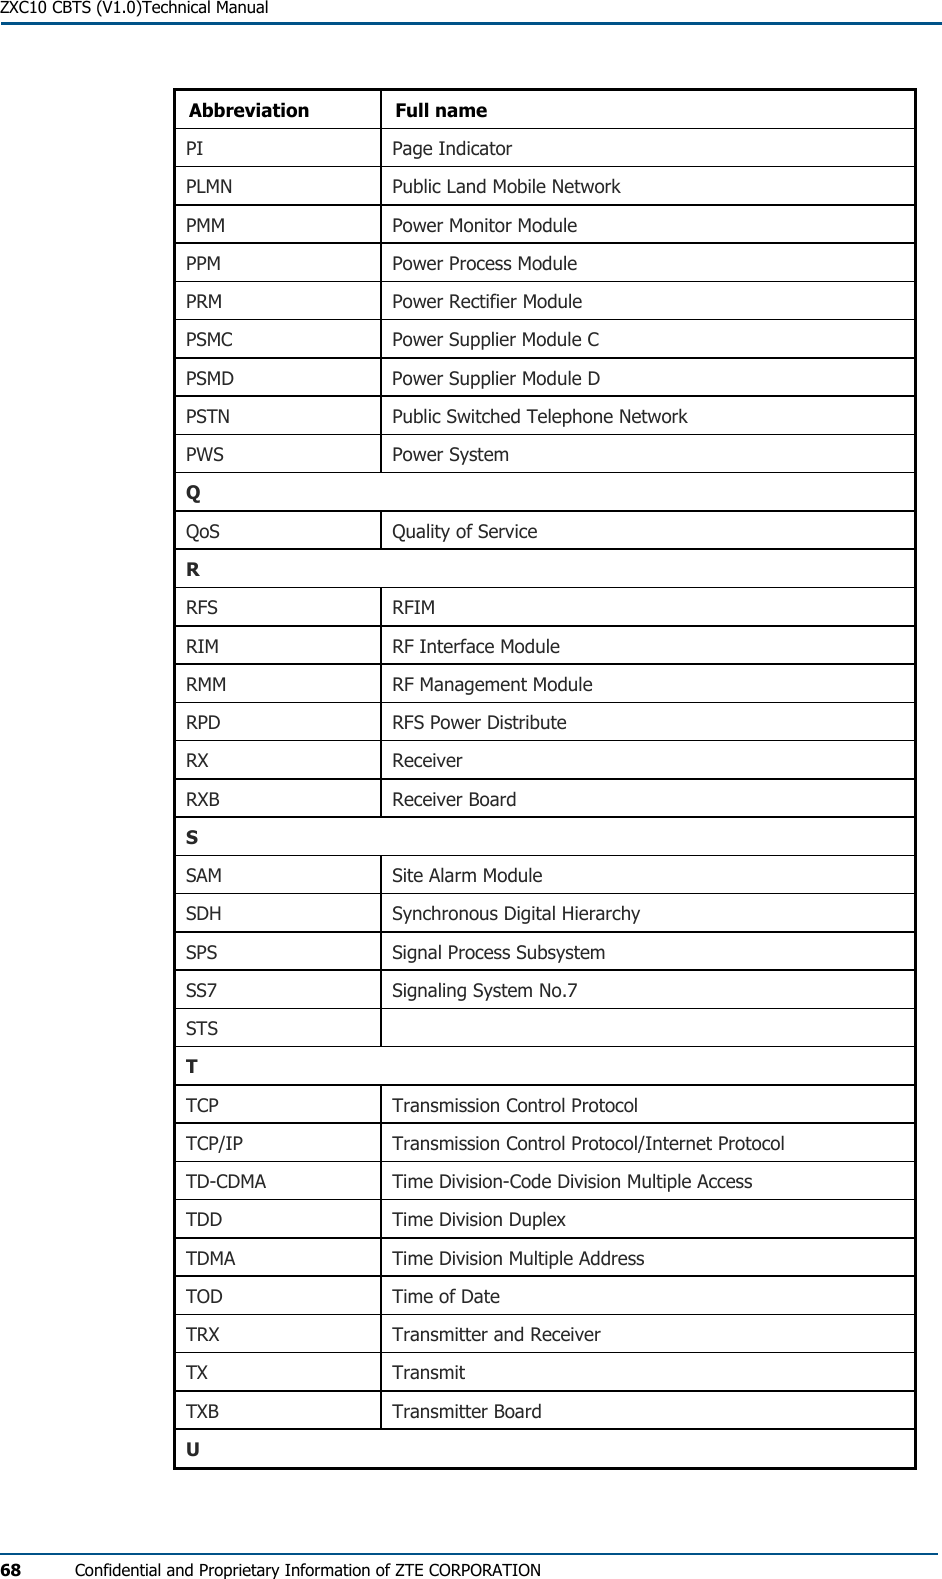  ZXC10 CBTS (V1.0)Technical Manual 68  Confidential and Proprietary Information of ZTE CORPORATION Abbreviation Full name PI Page Indicator PLMN  Public Land Mobile Network PMM  Power Monitor Module PPM  Power Process Module PRM  Power Rectifier Module PSMC  Power Supplier Module C PSMD  Power Supplier Module D PSTN  Public Switched Telephone Network PWS Power System Q QoS  Quality of Service R RFS RFIM RIM  RF Interface Module RMM  RF Management Module RPD  RFS Power Distribute RX Receiver RXB Receiver Board S SAM  Site Alarm Module SDH  Synchronous Digital Hierarchy SPS  Signal Process Subsystem SS7  Signaling System No.7 STS  T TCP  Transmission Control Protocol TCP/IP  Transmission Control Protocol/Internet Protocol TD-CDMA  Time Division-Code Division Multiple Access TDD  Time Division Duplex TDMA  Time Division Multiple Address TOD  Time of Date TRX  Transmitter and Receiver TX Transmit TXB Transmitter Board U 